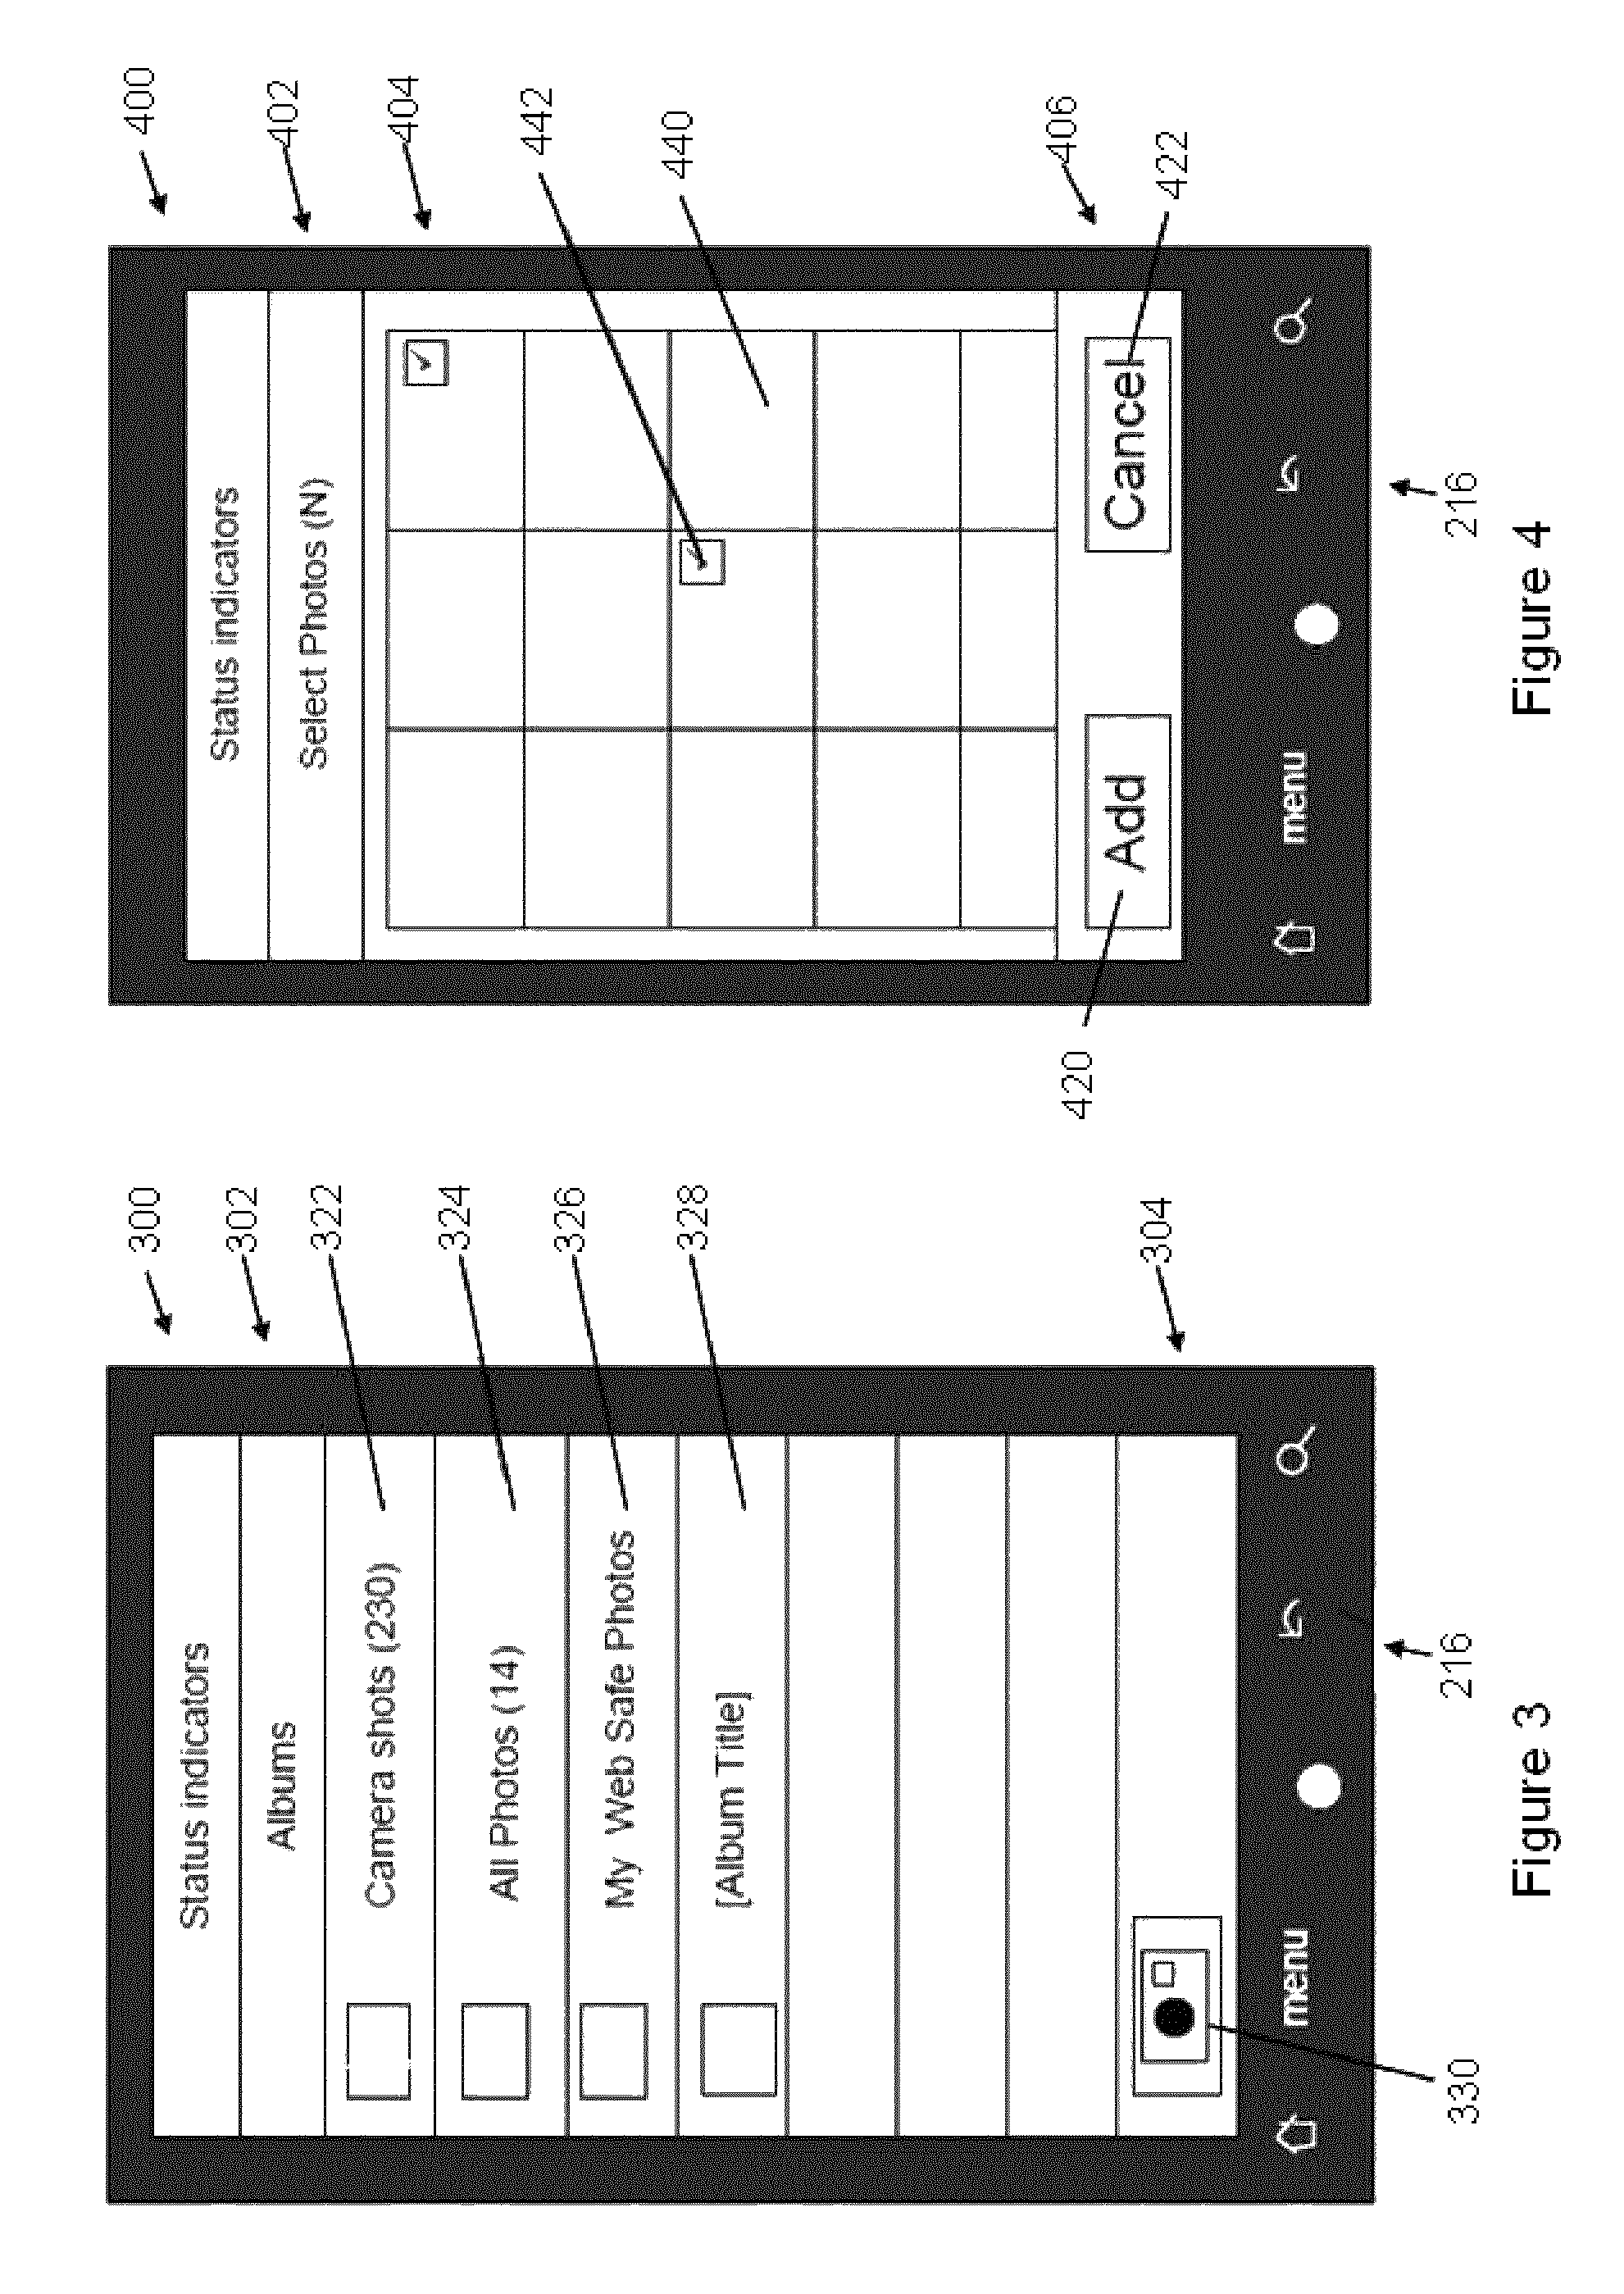 System and method for controlling and organizing metadata associated with on-line content